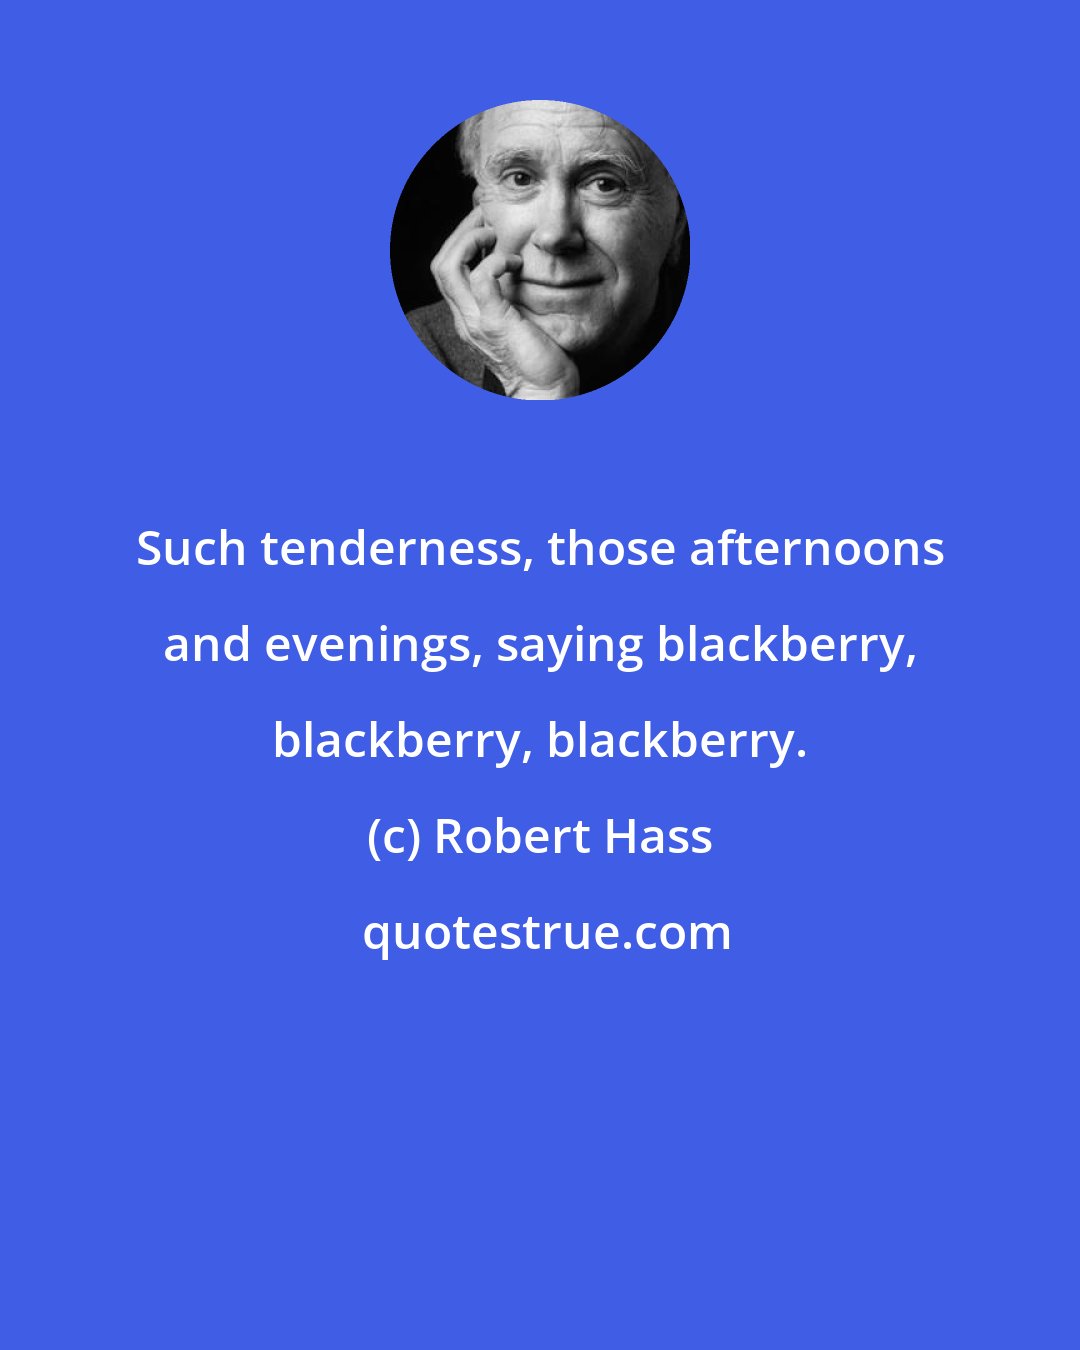 Robert Hass: Such tenderness, those afternoons and evenings, saying blackberry, blackberry, blackberry.